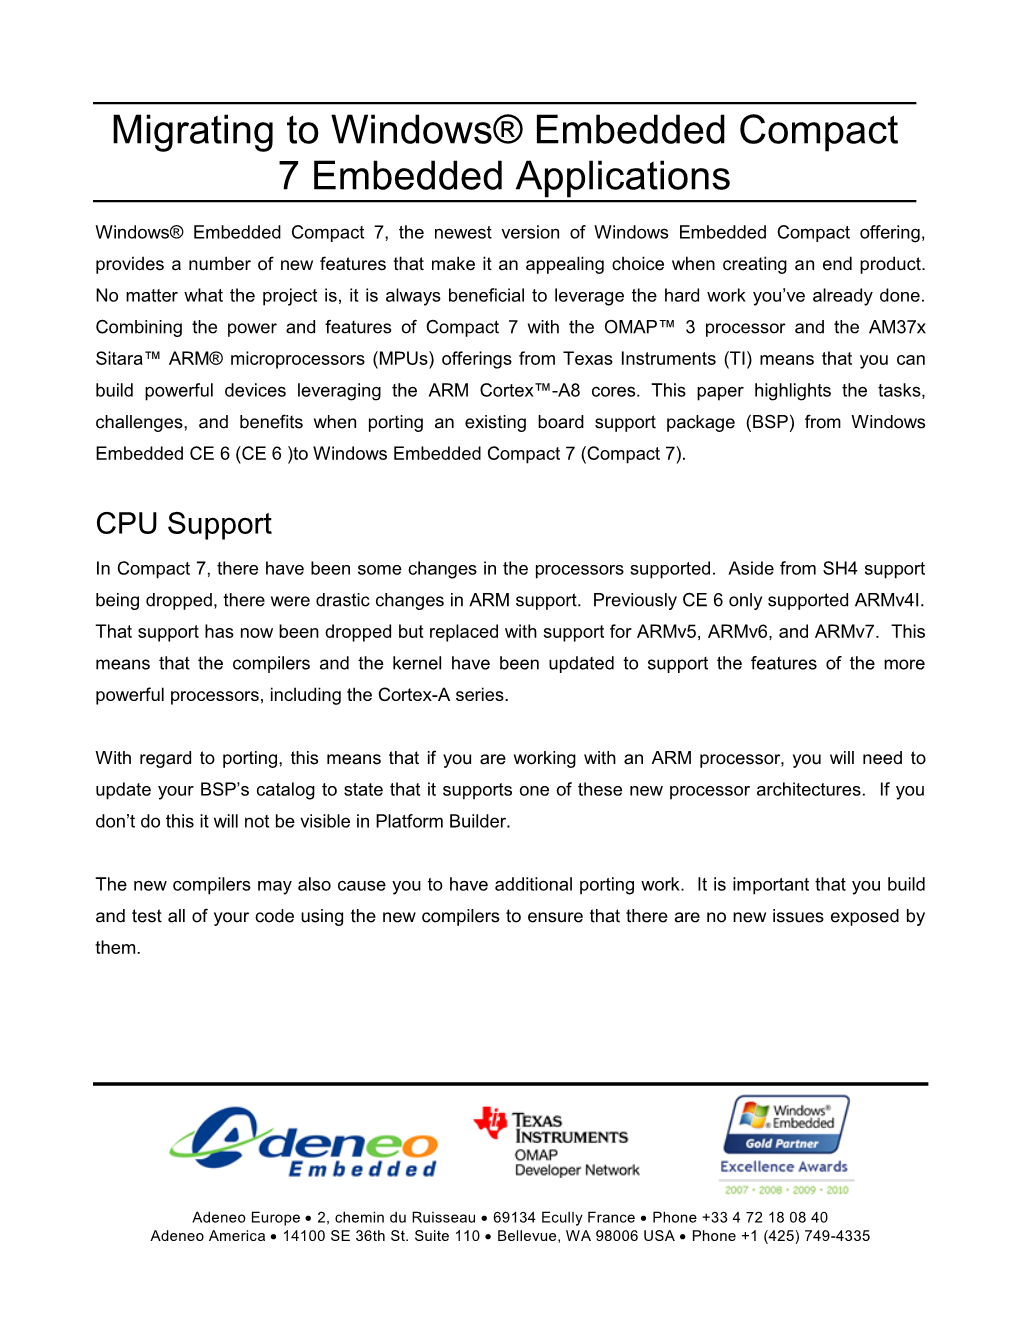 Migrating to Windows® Embedded Compact 7 Embedded Applications